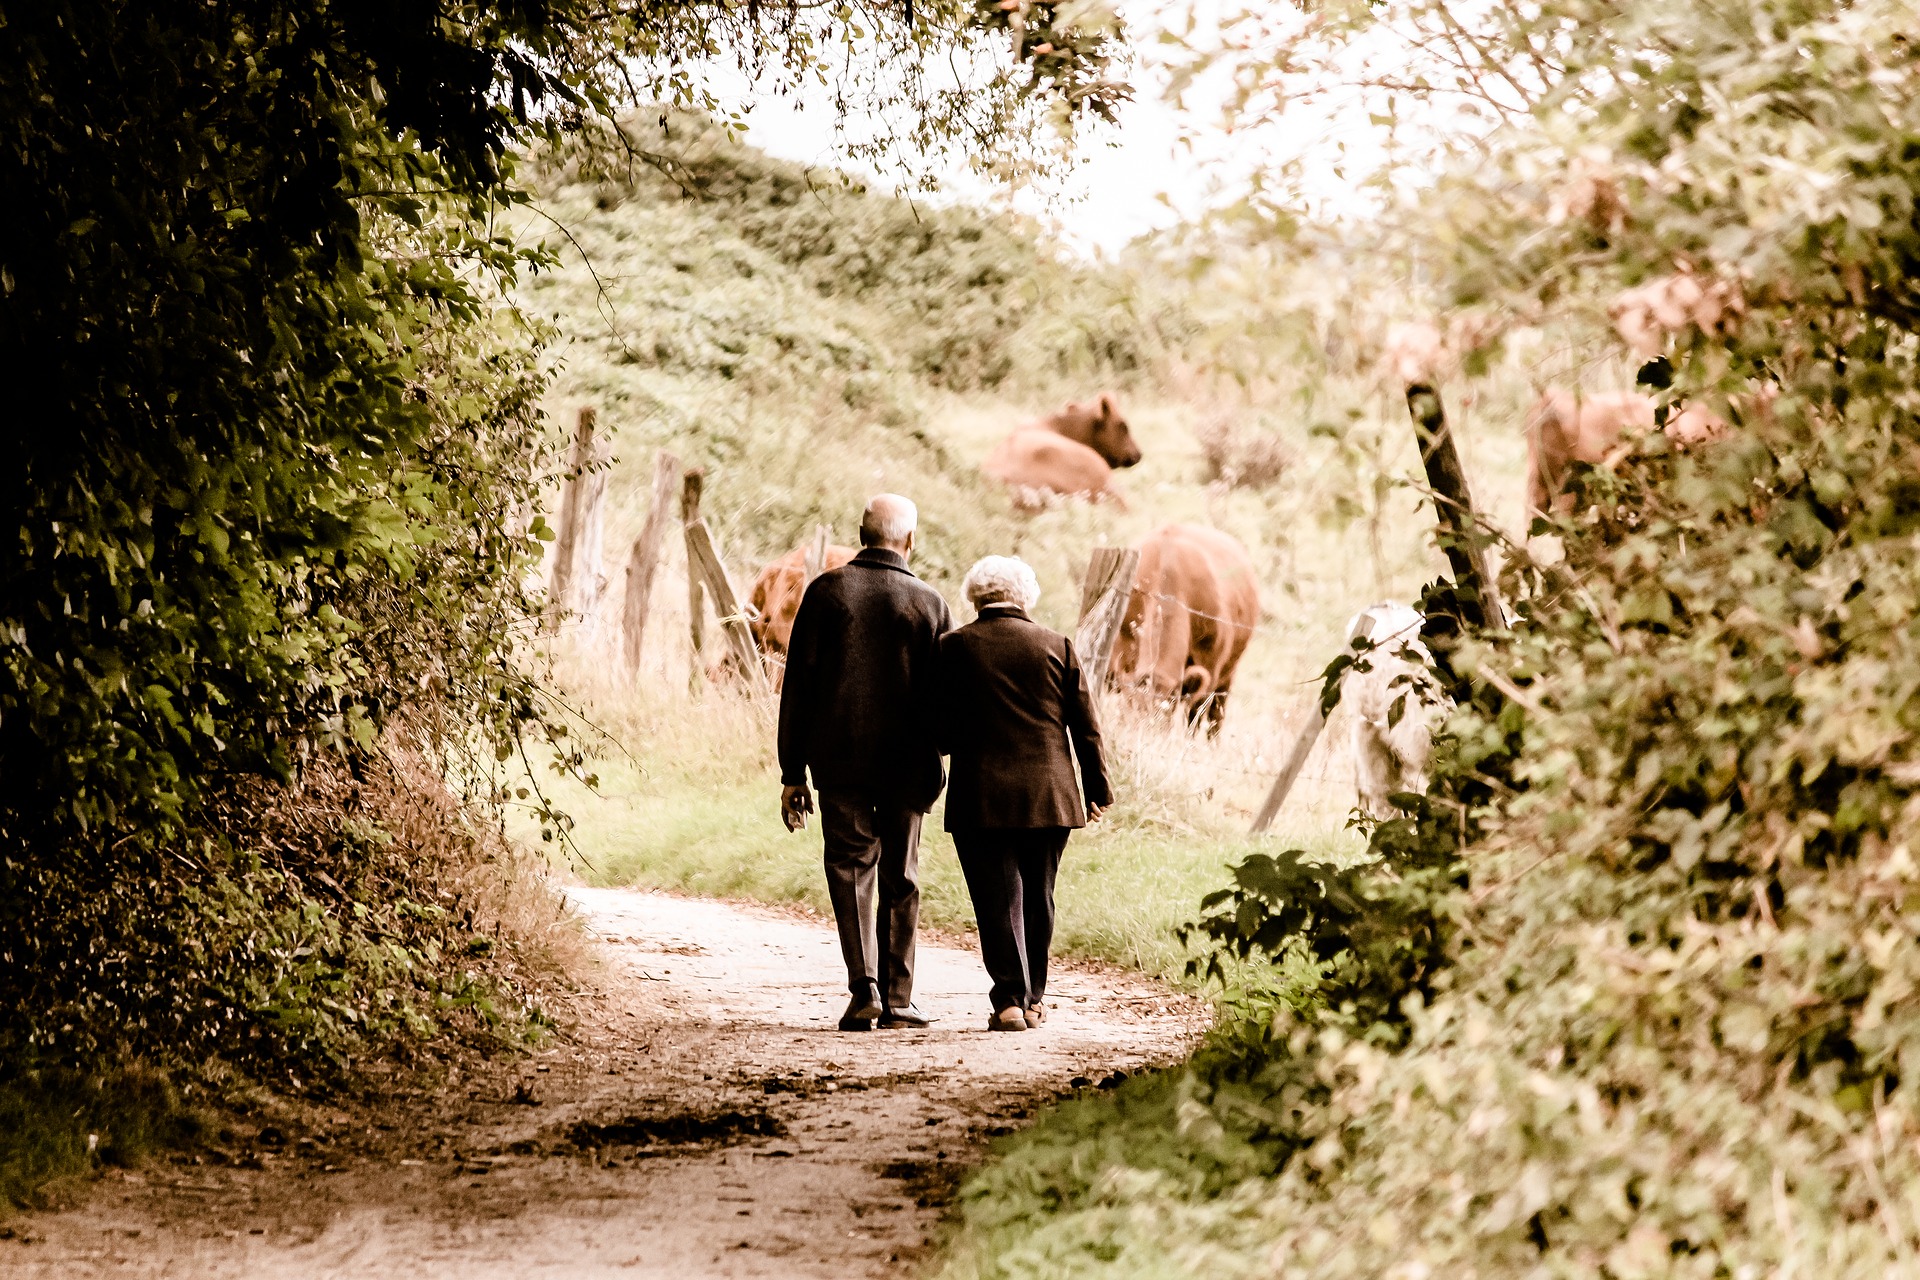 Two older people walk down a sunny path towards a field with cows in it